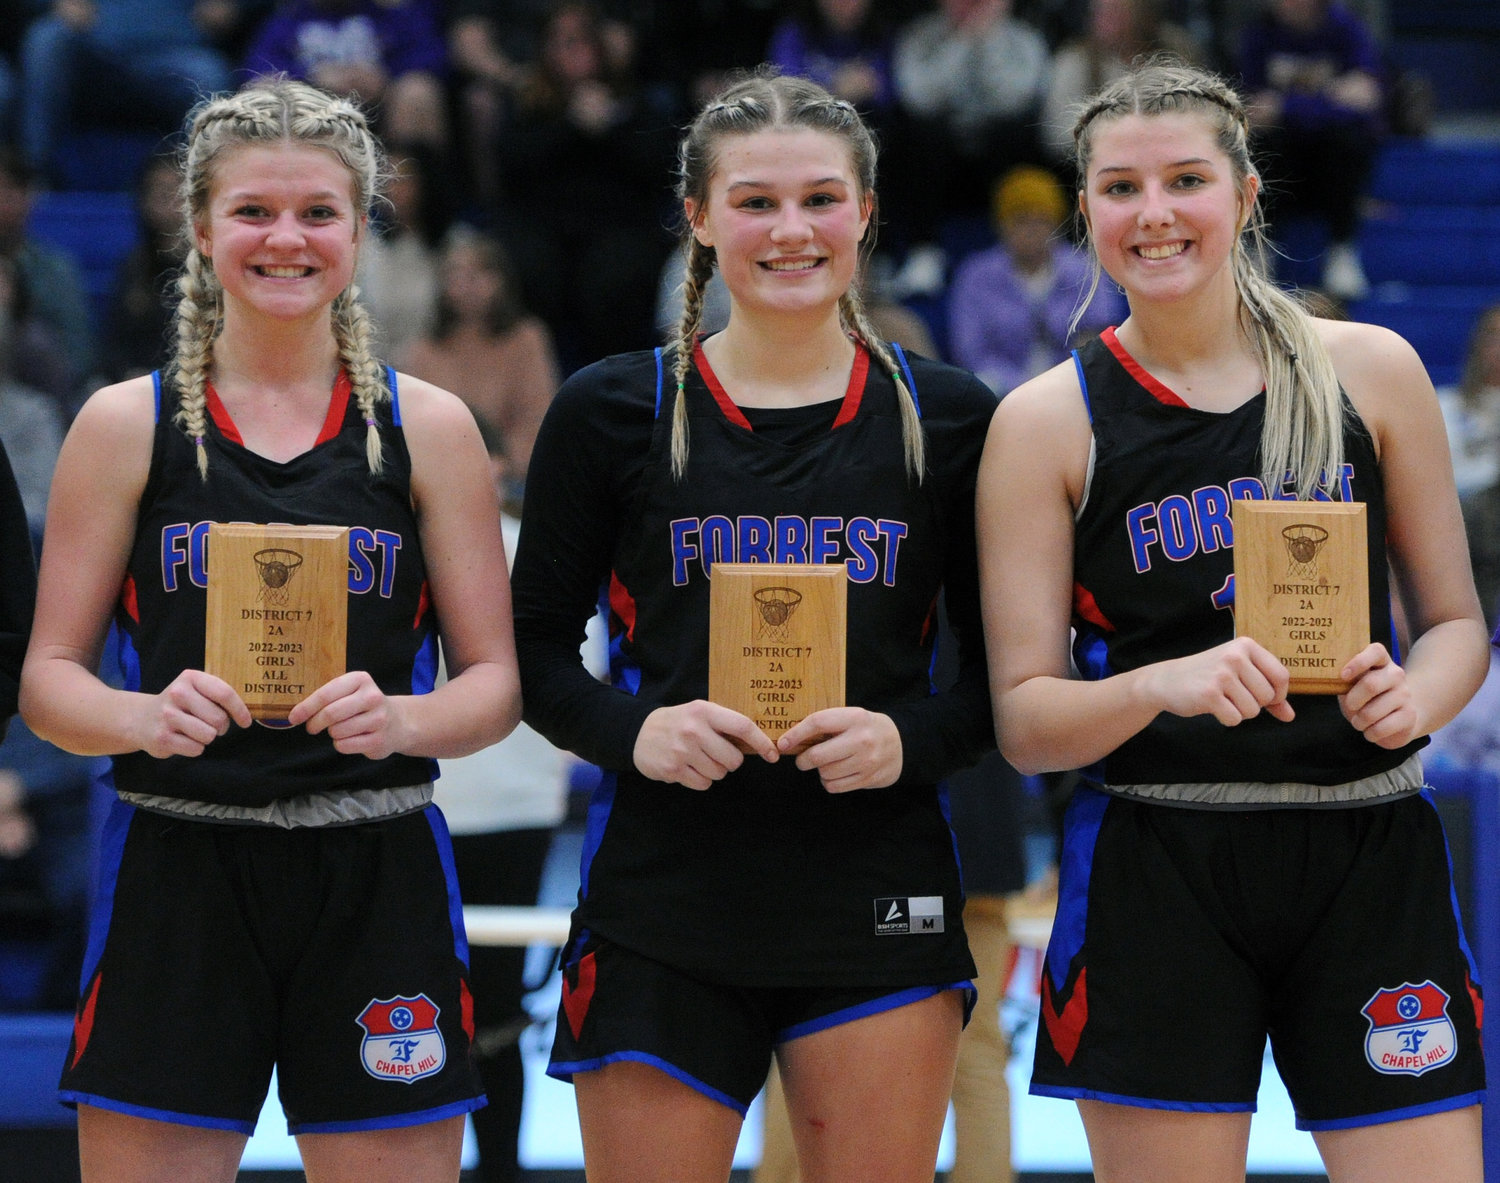 Three Lady Rockets earned season awards for their efforts this year. Earning All-District honors are (from left) Macyn Kirby, Kinslee Inlow and Megan Mealer. Kirby and Inlow also earned All-Tournament honors as well.